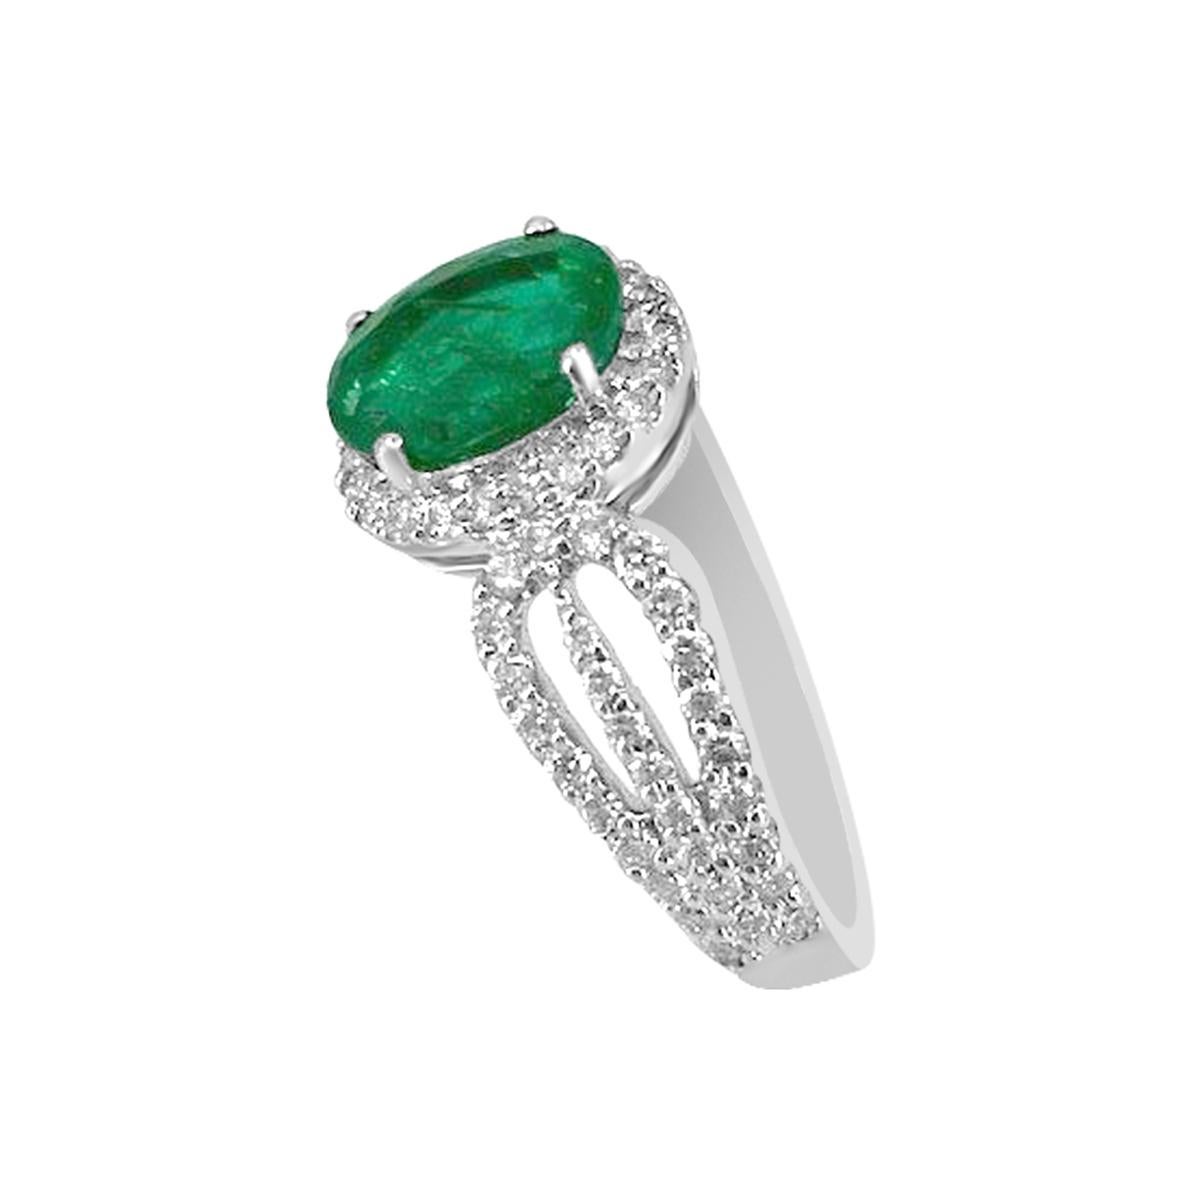 Gracefully Sculpted Beautiful Emerald Vintage Ring Features 8x6mm Oval Cut Emerald Gemstone Setting And Finished In The Diamond Scalloped Band To Complete Its Distinctive And Elegant Look. Adore Your Future Bride With This Vintage Inspired Elegant